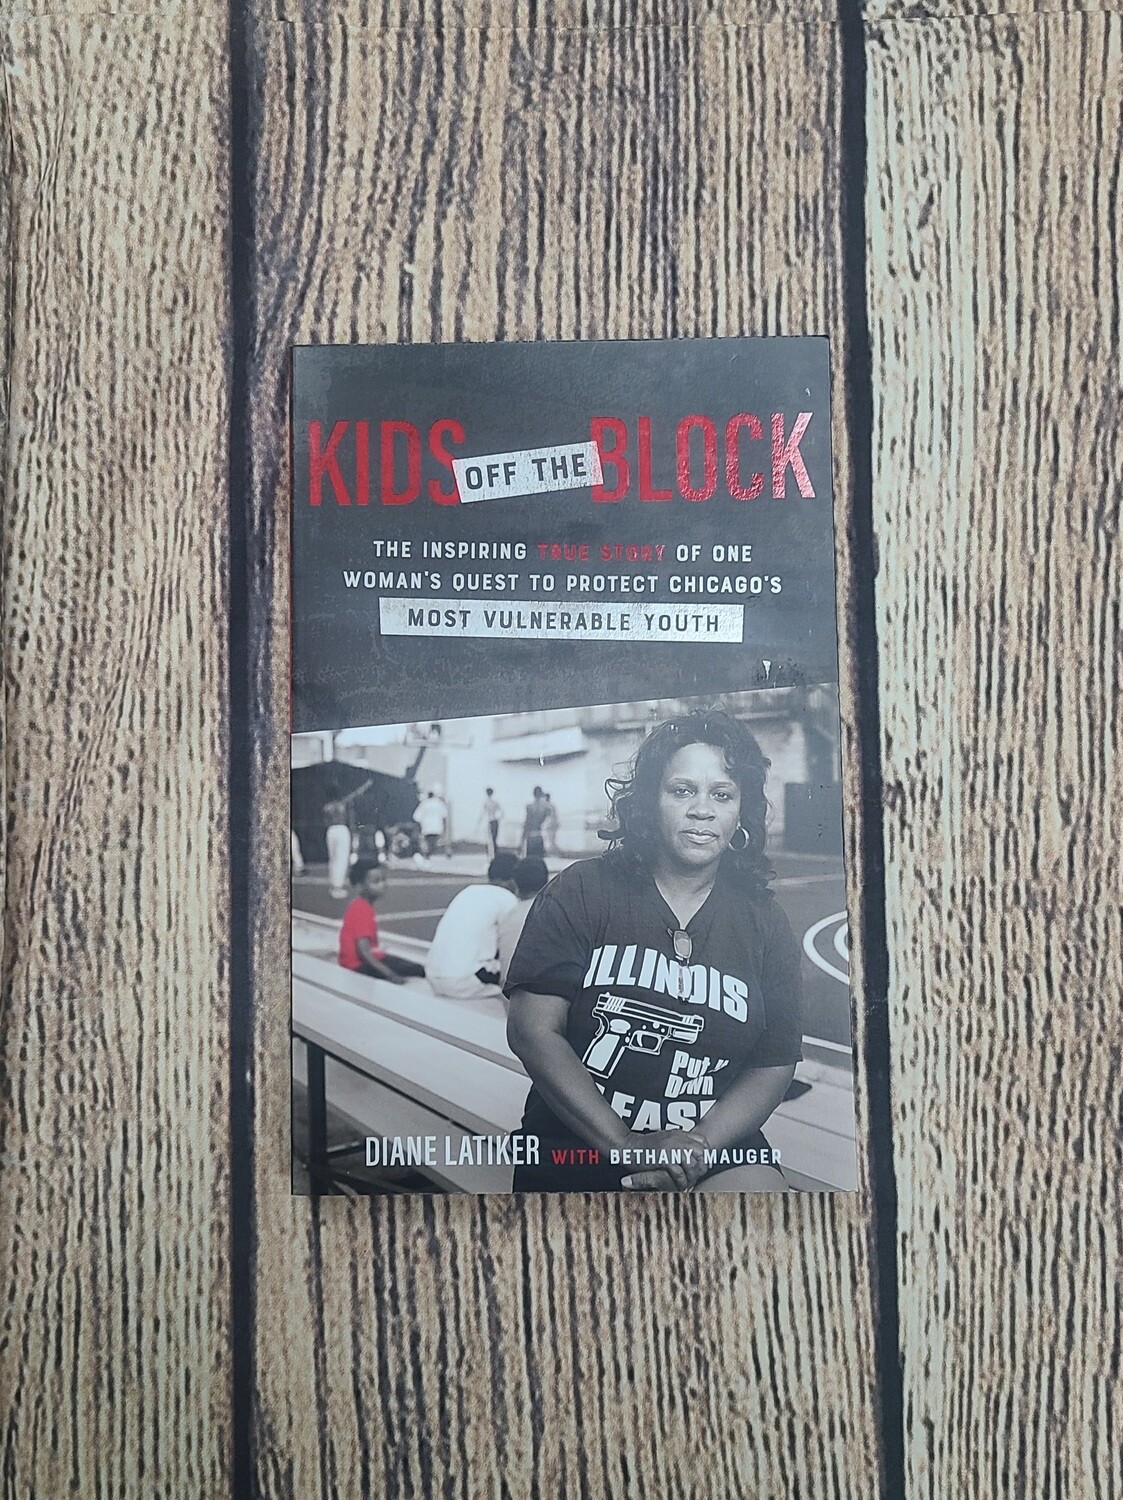 Kids off the Block: The Inspiring True Story of One Woman's Quest to Protect Chicago's Most Vulnerable Youth by Diane Latiker with Bethany Mauger